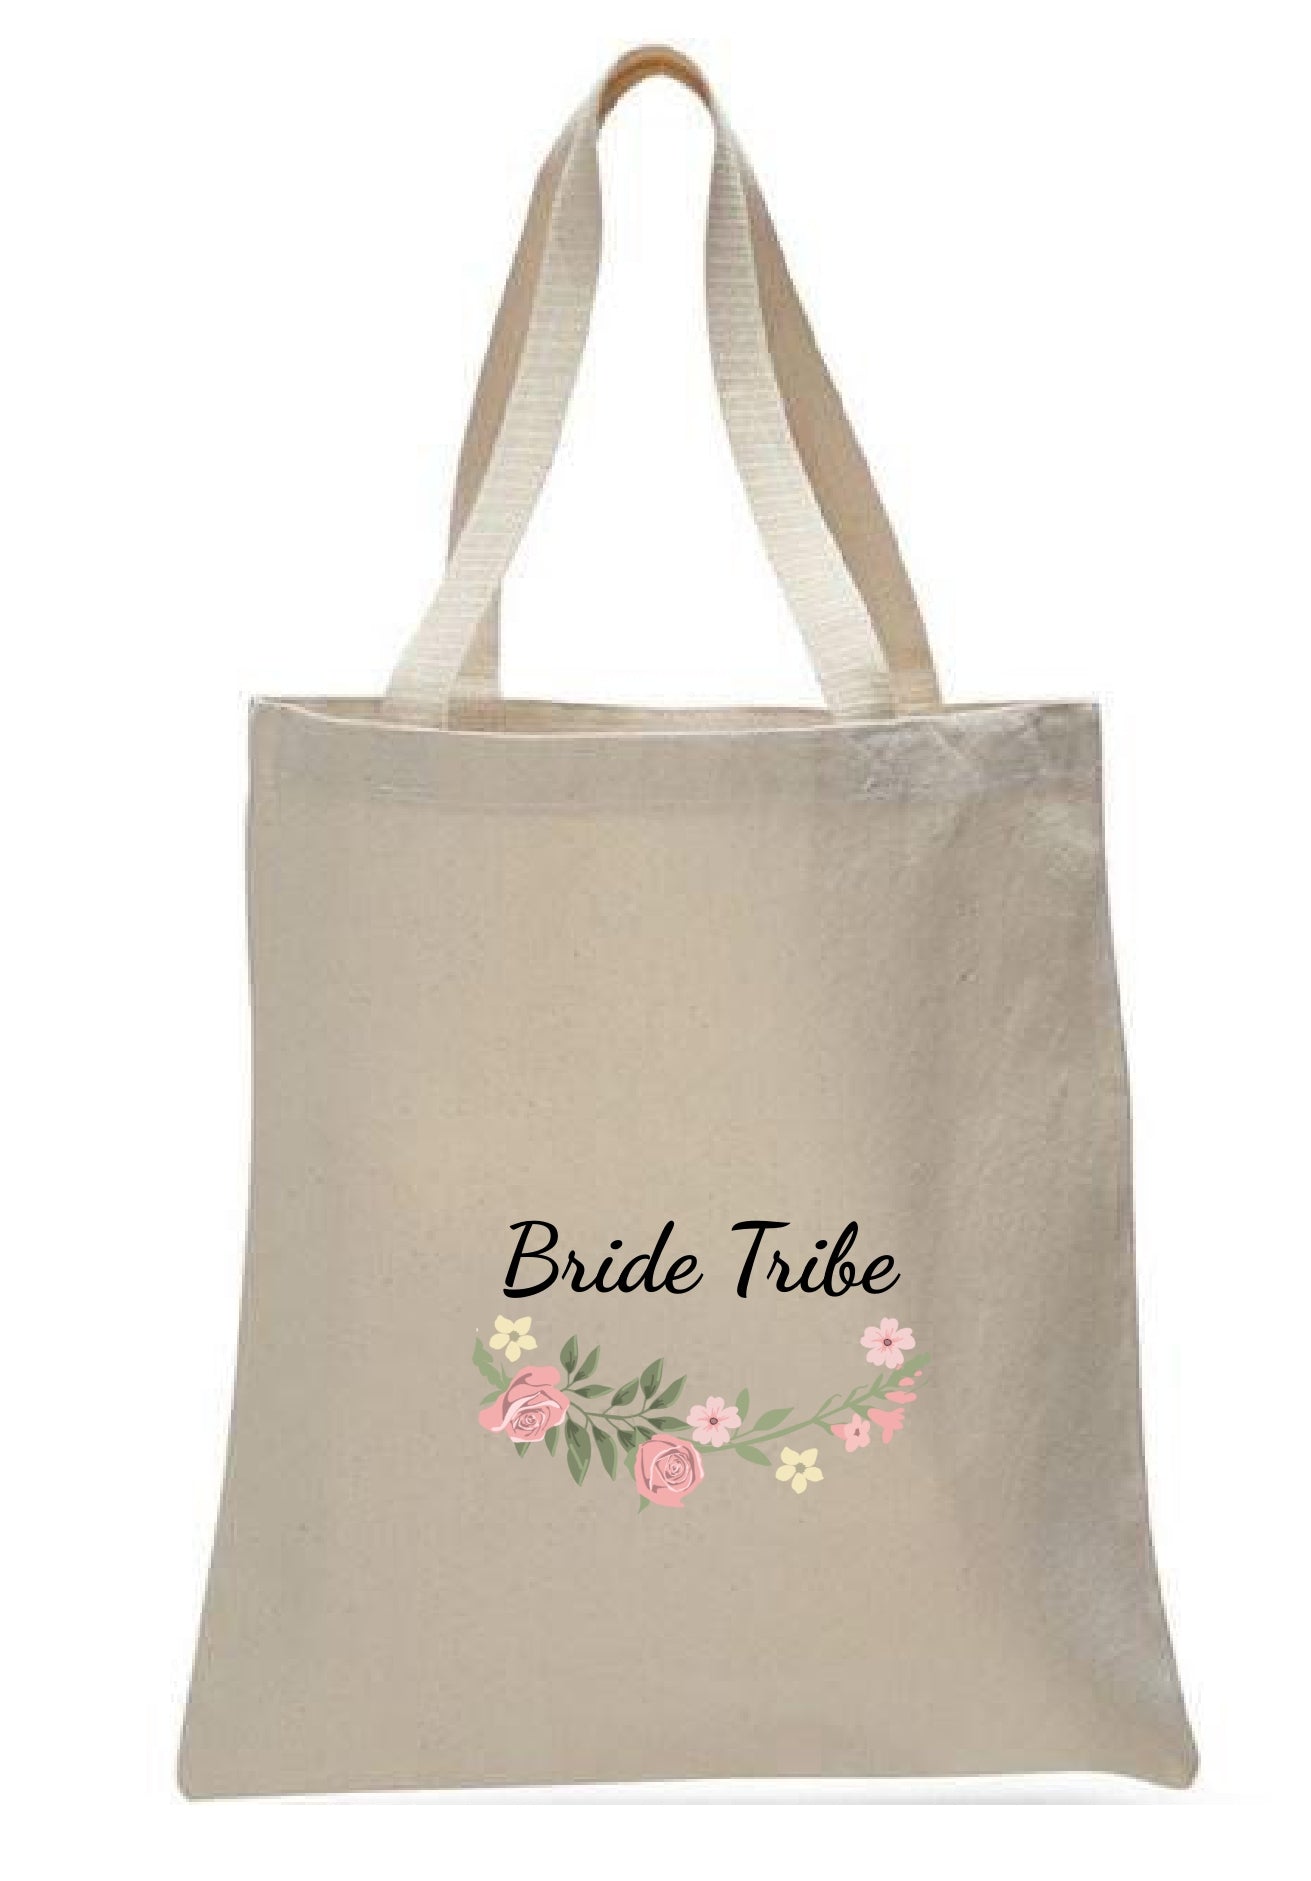 Wedding Canvas Gift Tote Bags, Party Gifts, Bride Tribe, WB40